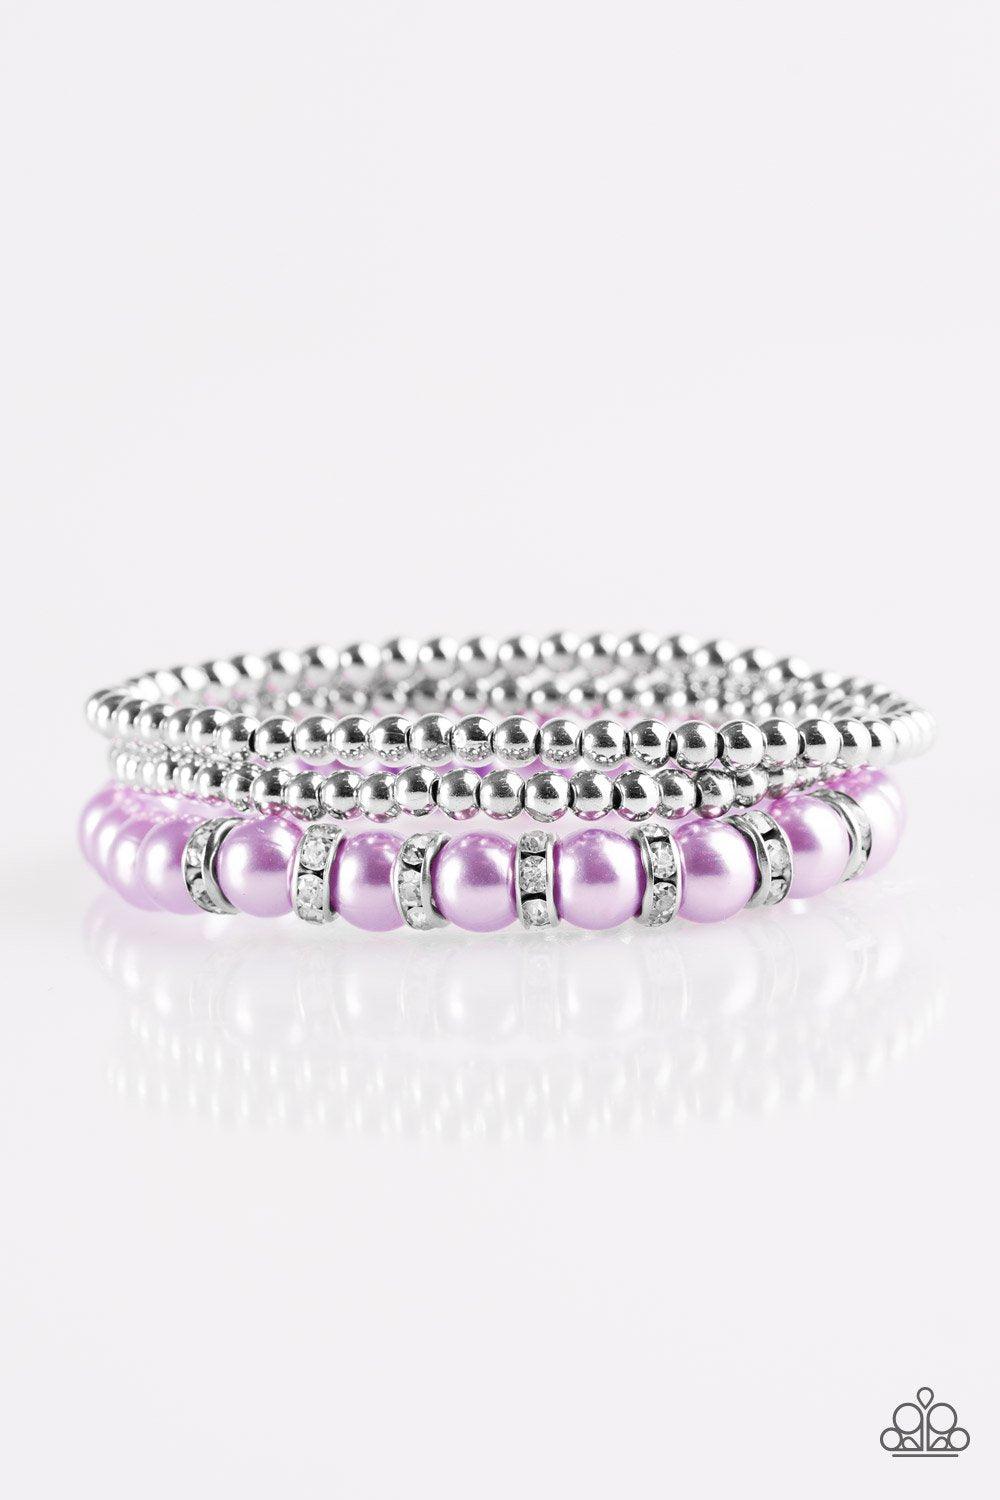 Perfect POSH-ture Silver and Purple Pearl Bracelet Set - Paparazzi Accessories-CarasShop.com - $5 Jewelry by Cara Jewels